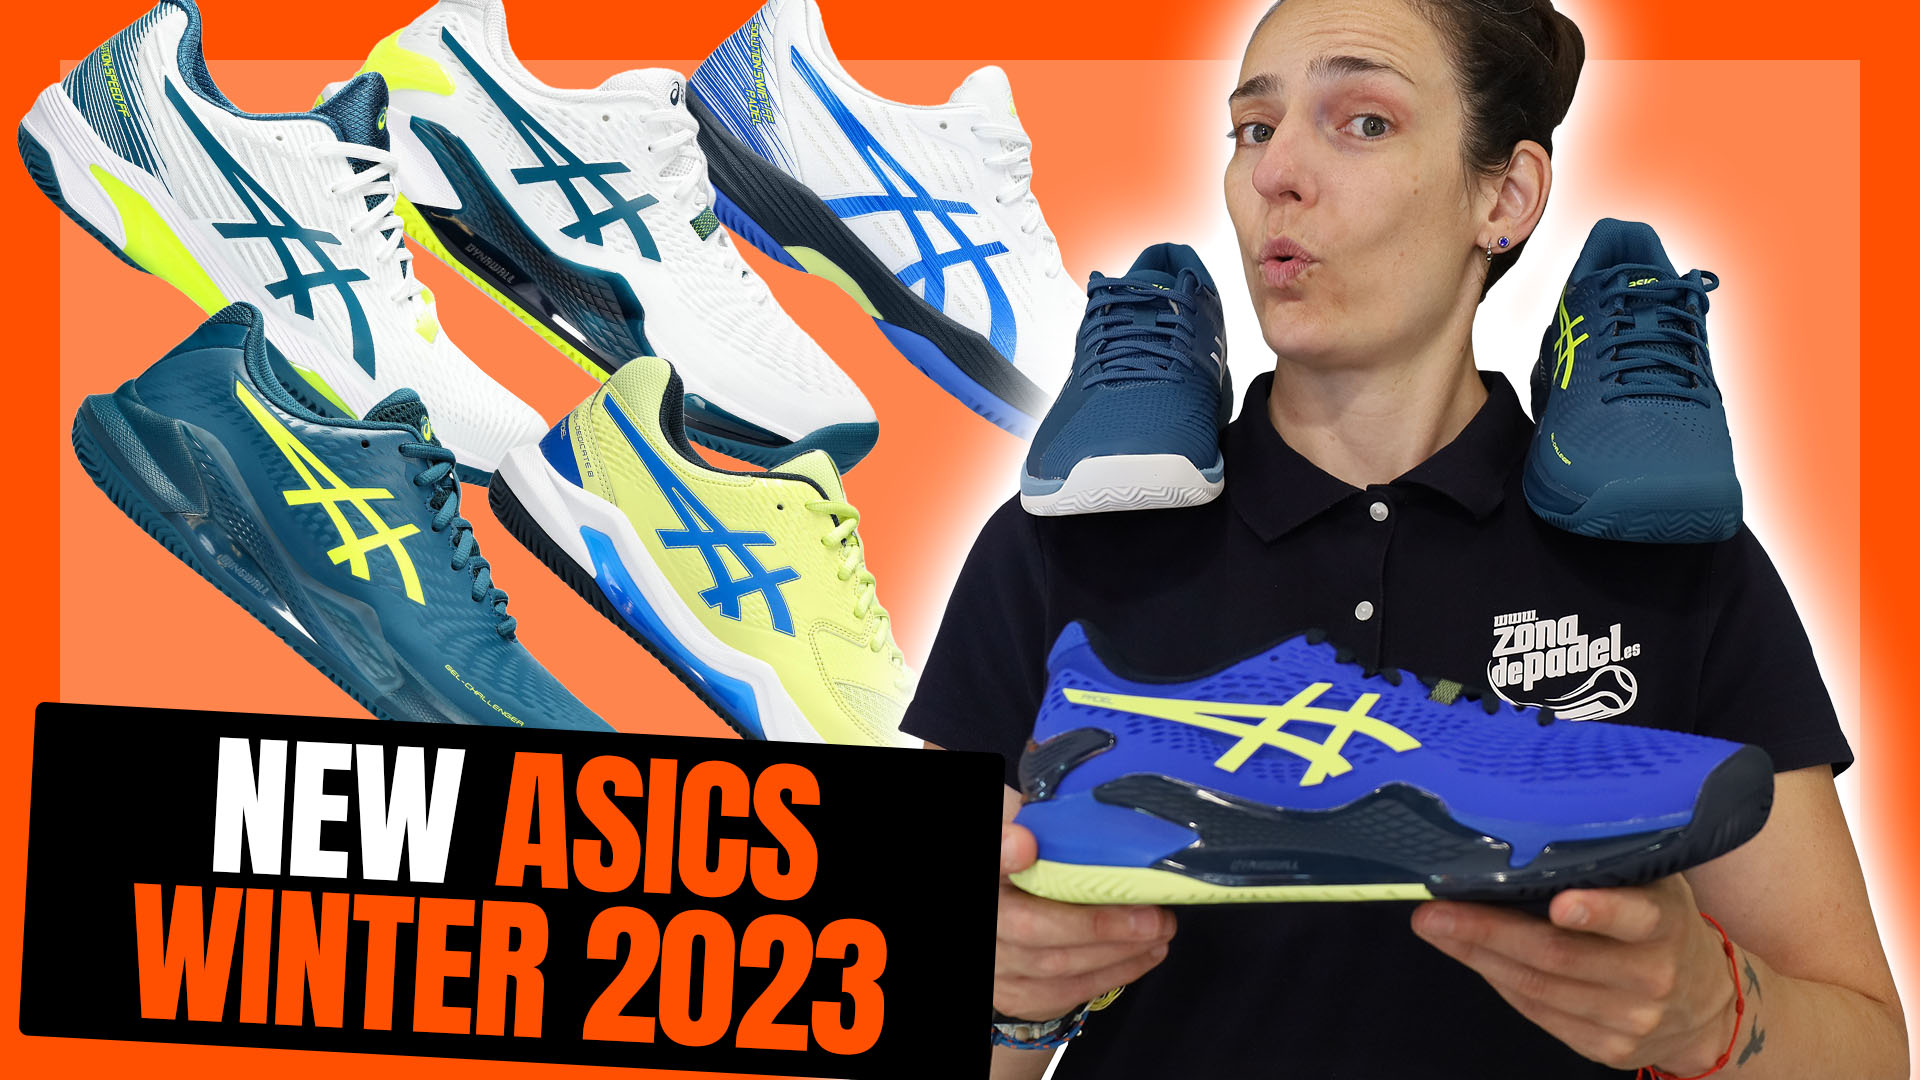 Asics padel shoes collection - Winter 2023 new models to play